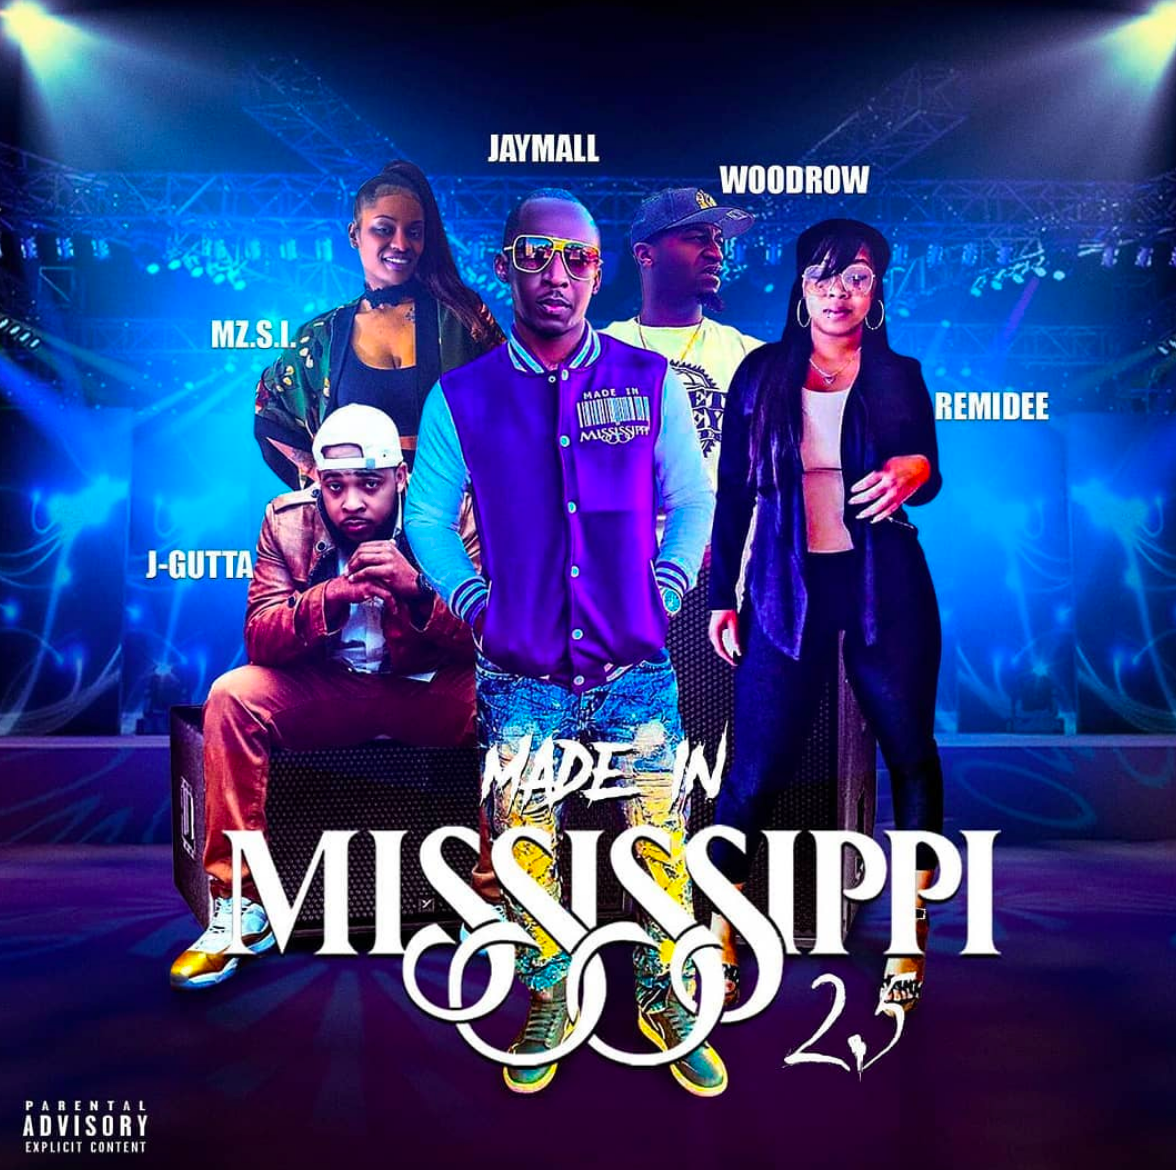 New video from Jaymall featuring some the top Hip Hop artist from the latest installment of Made In Mississippi 2.5.